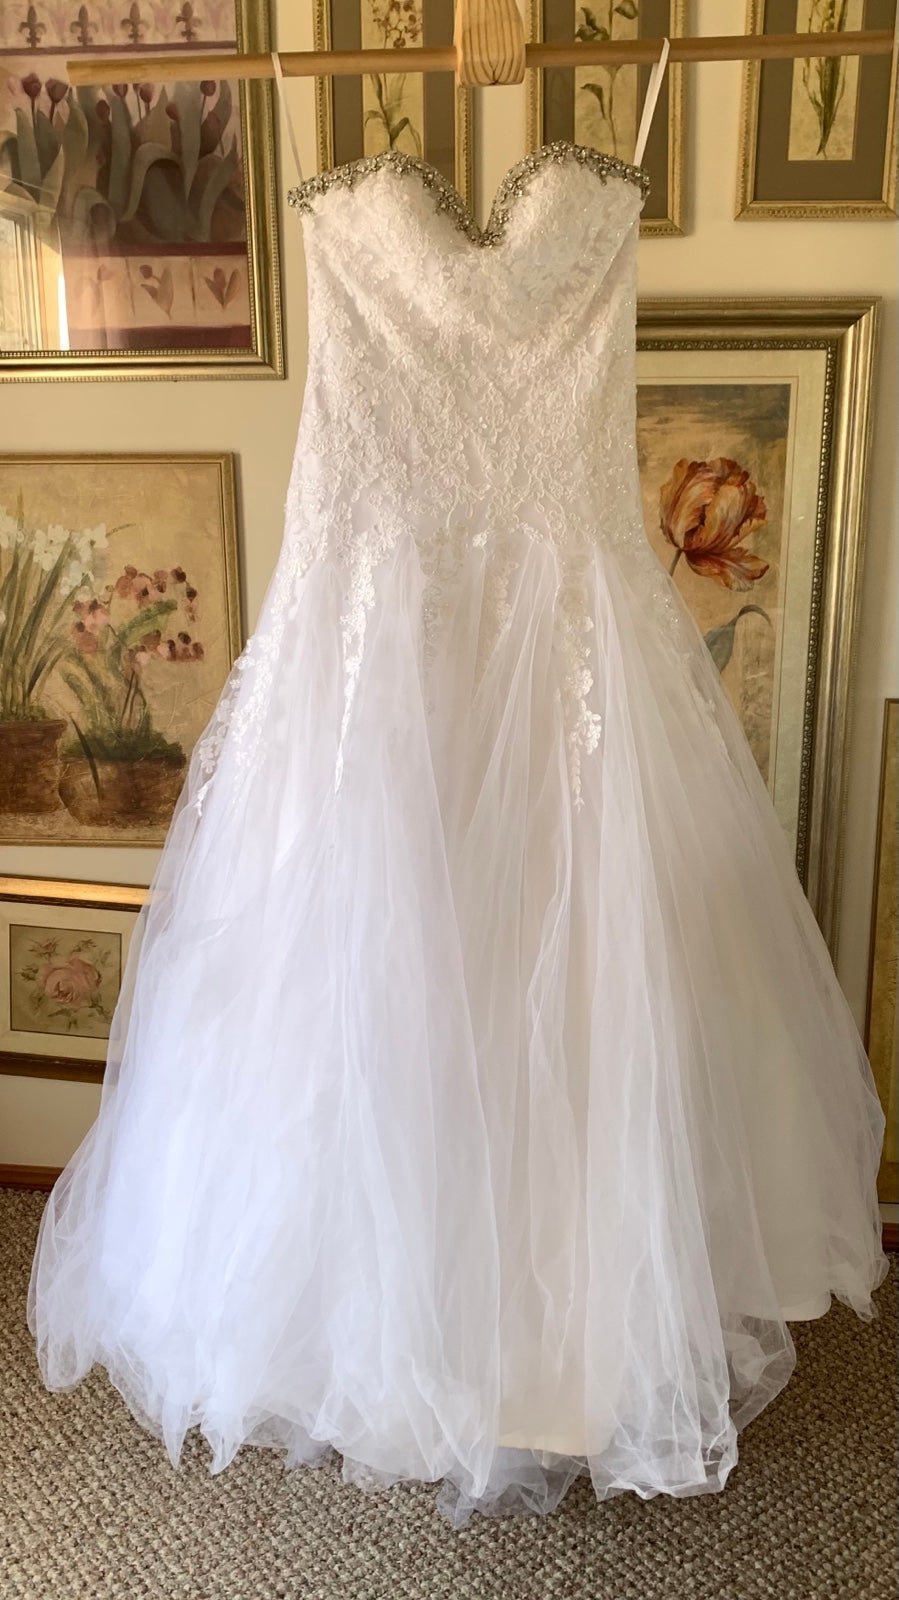 the Lowest price white lace strapless ball gown wedding